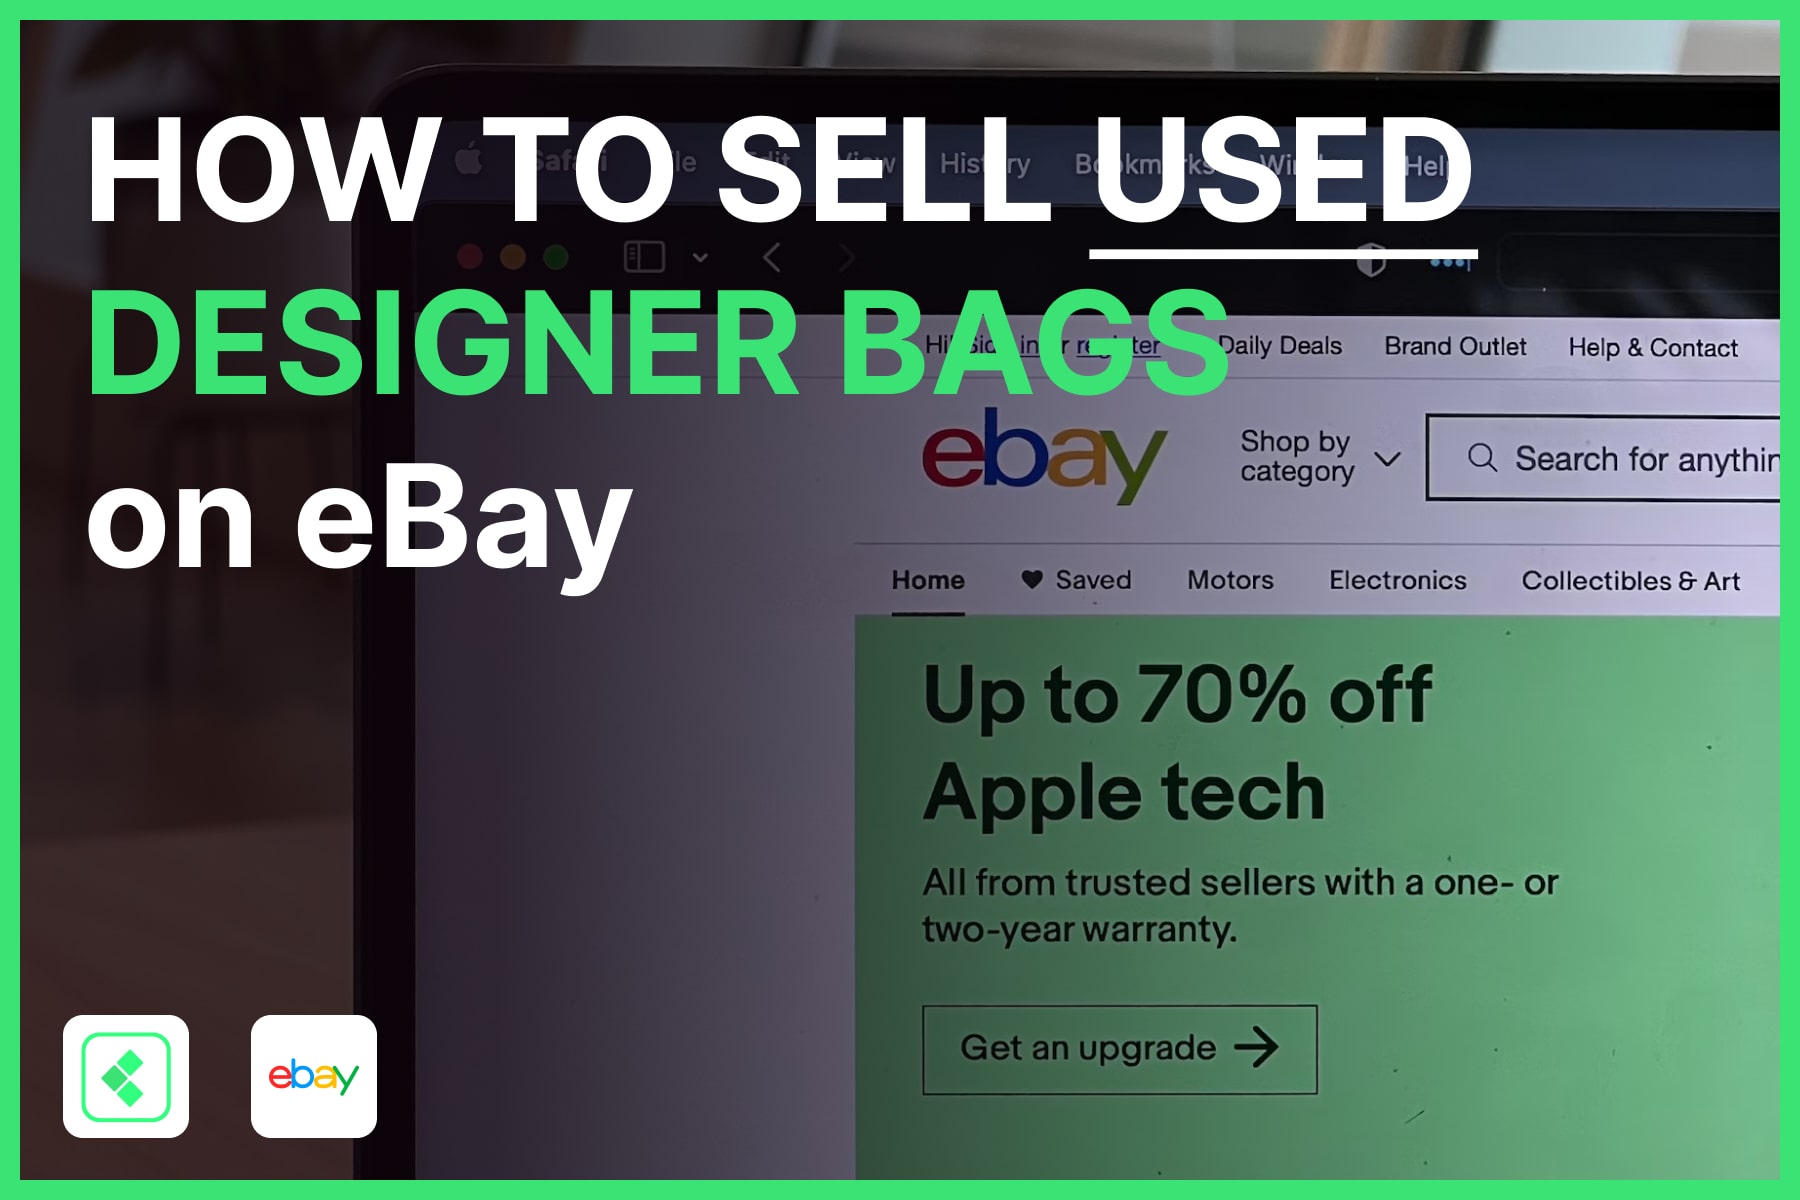 How to sell used designer bags on eBay